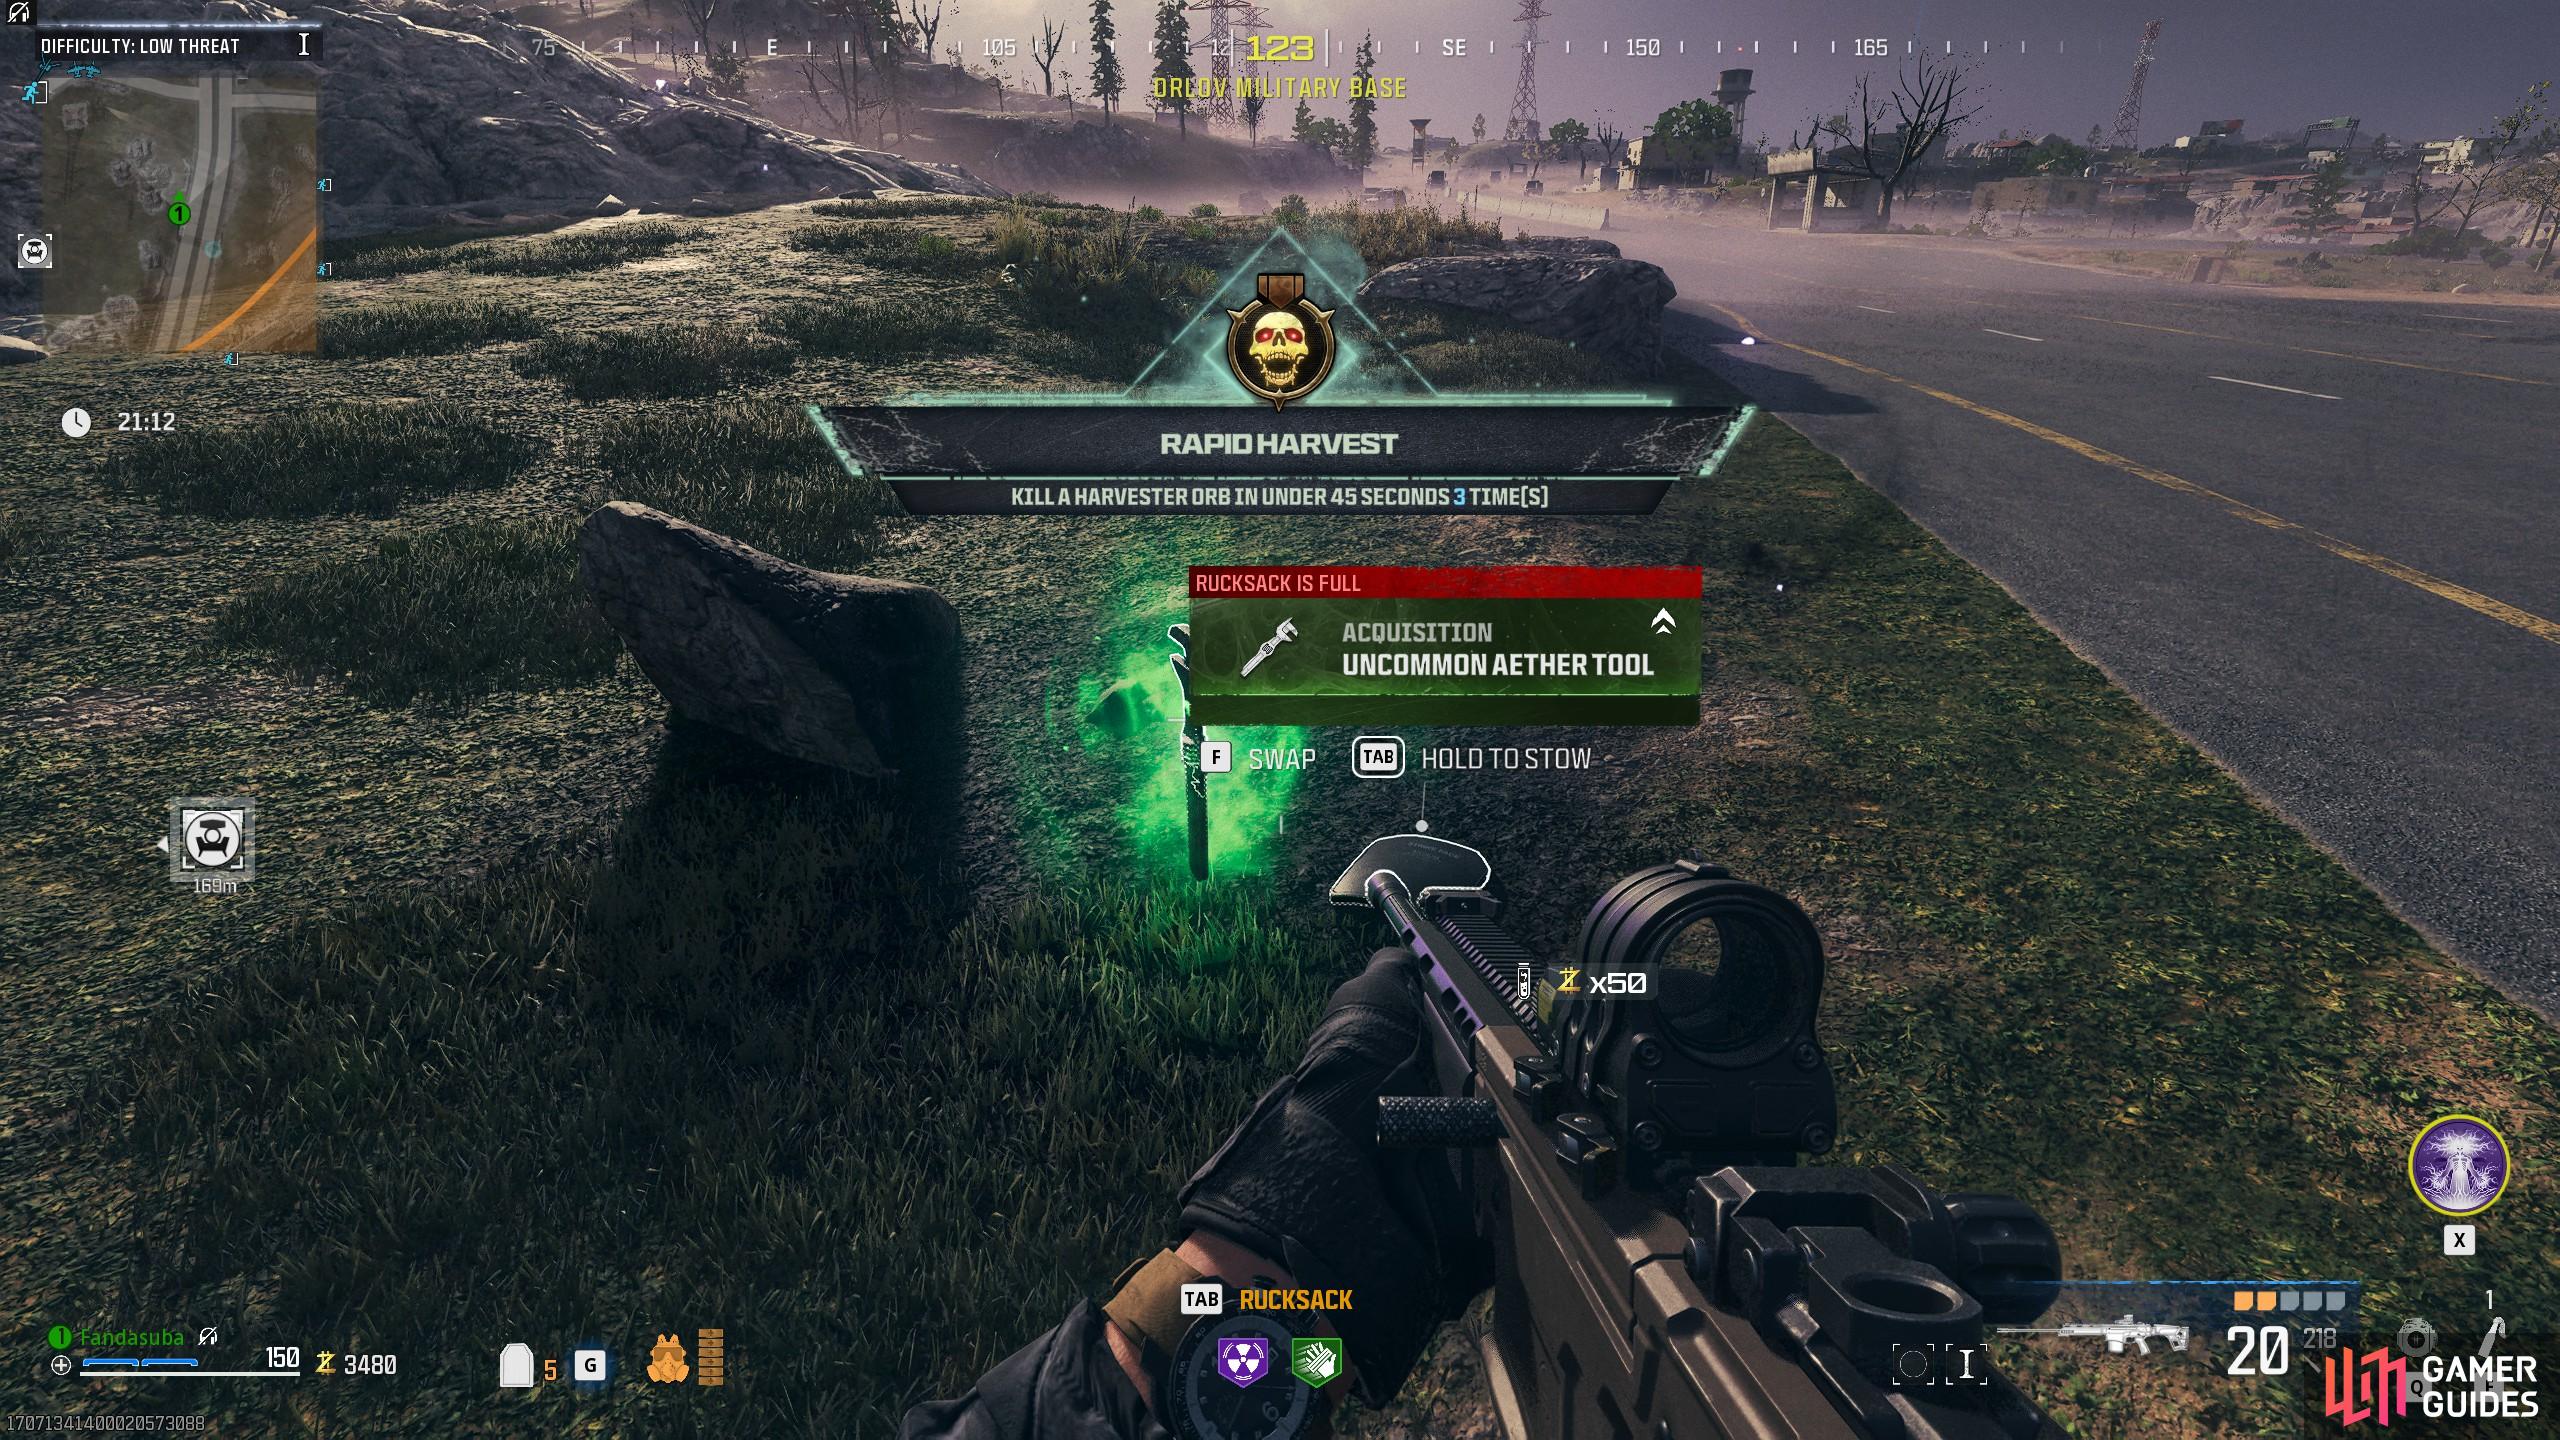 You can get lots of Aether, rarity upgrades, and challenge completions for defeating Harvester Orbs in MW3 Zombies.